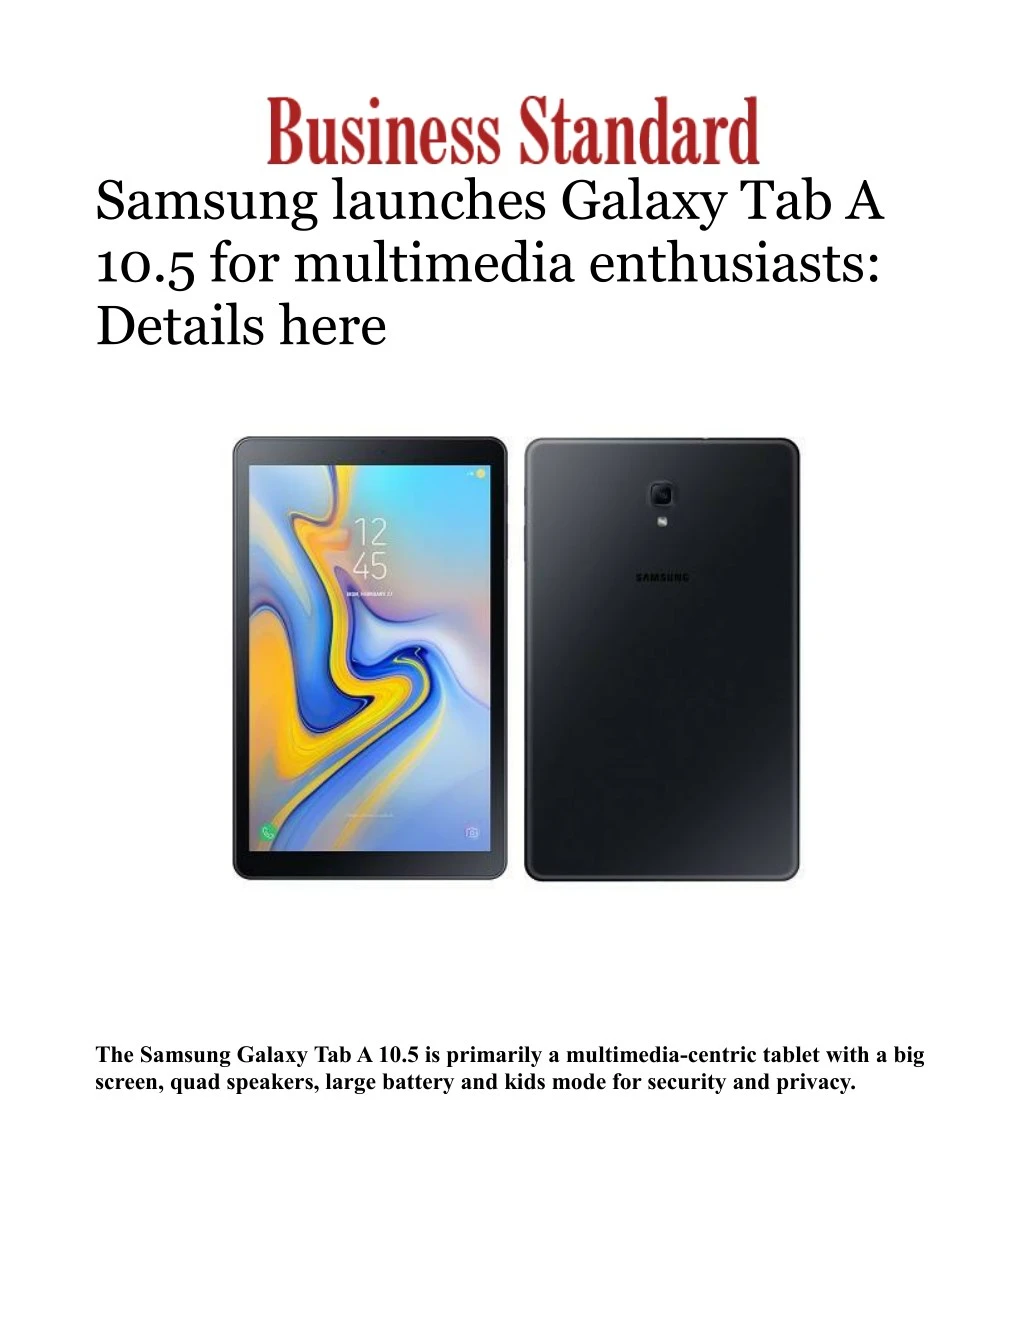 samsung launches galaxy tab a 10 5 for multimedia